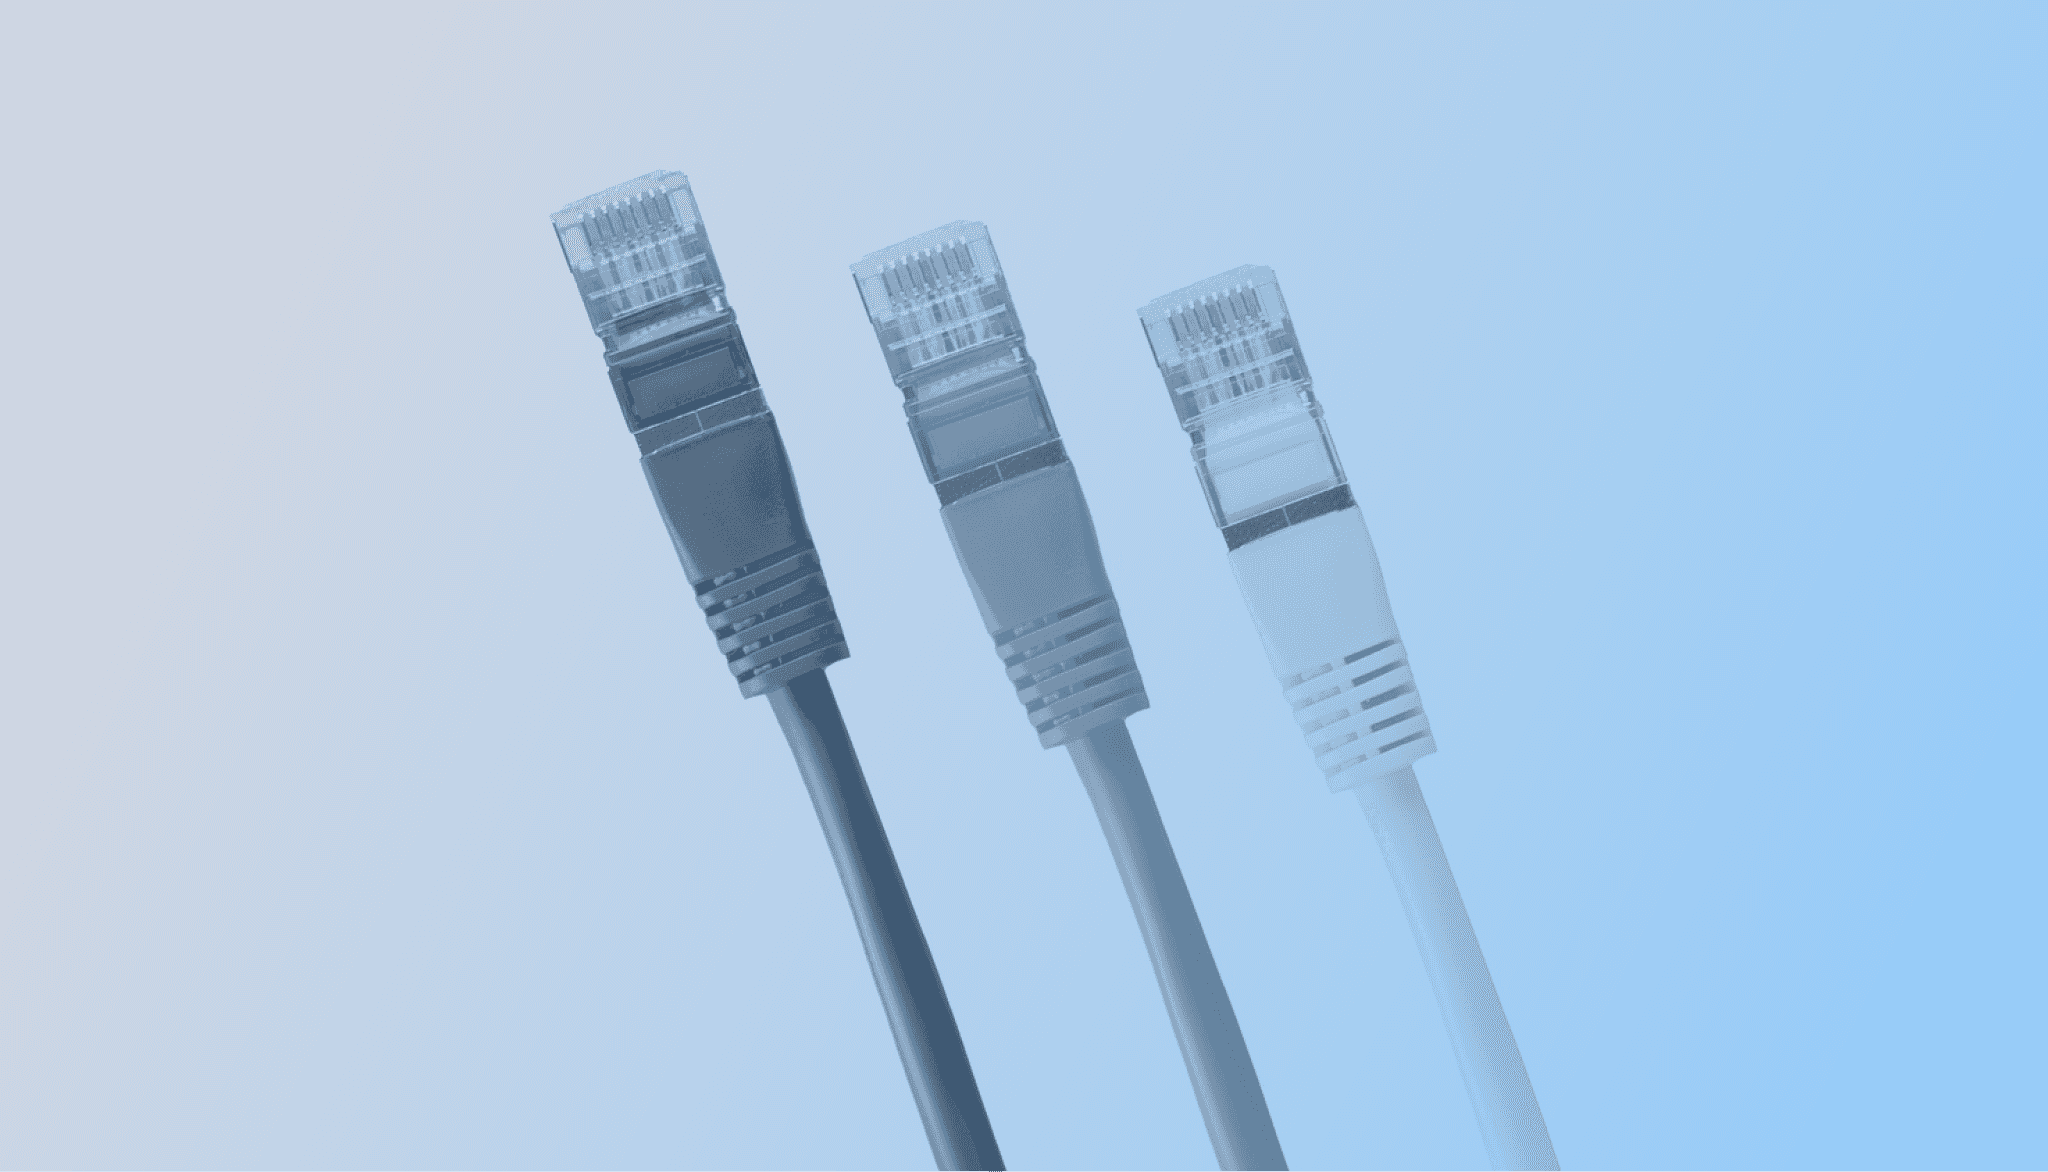 Three ethernet cables